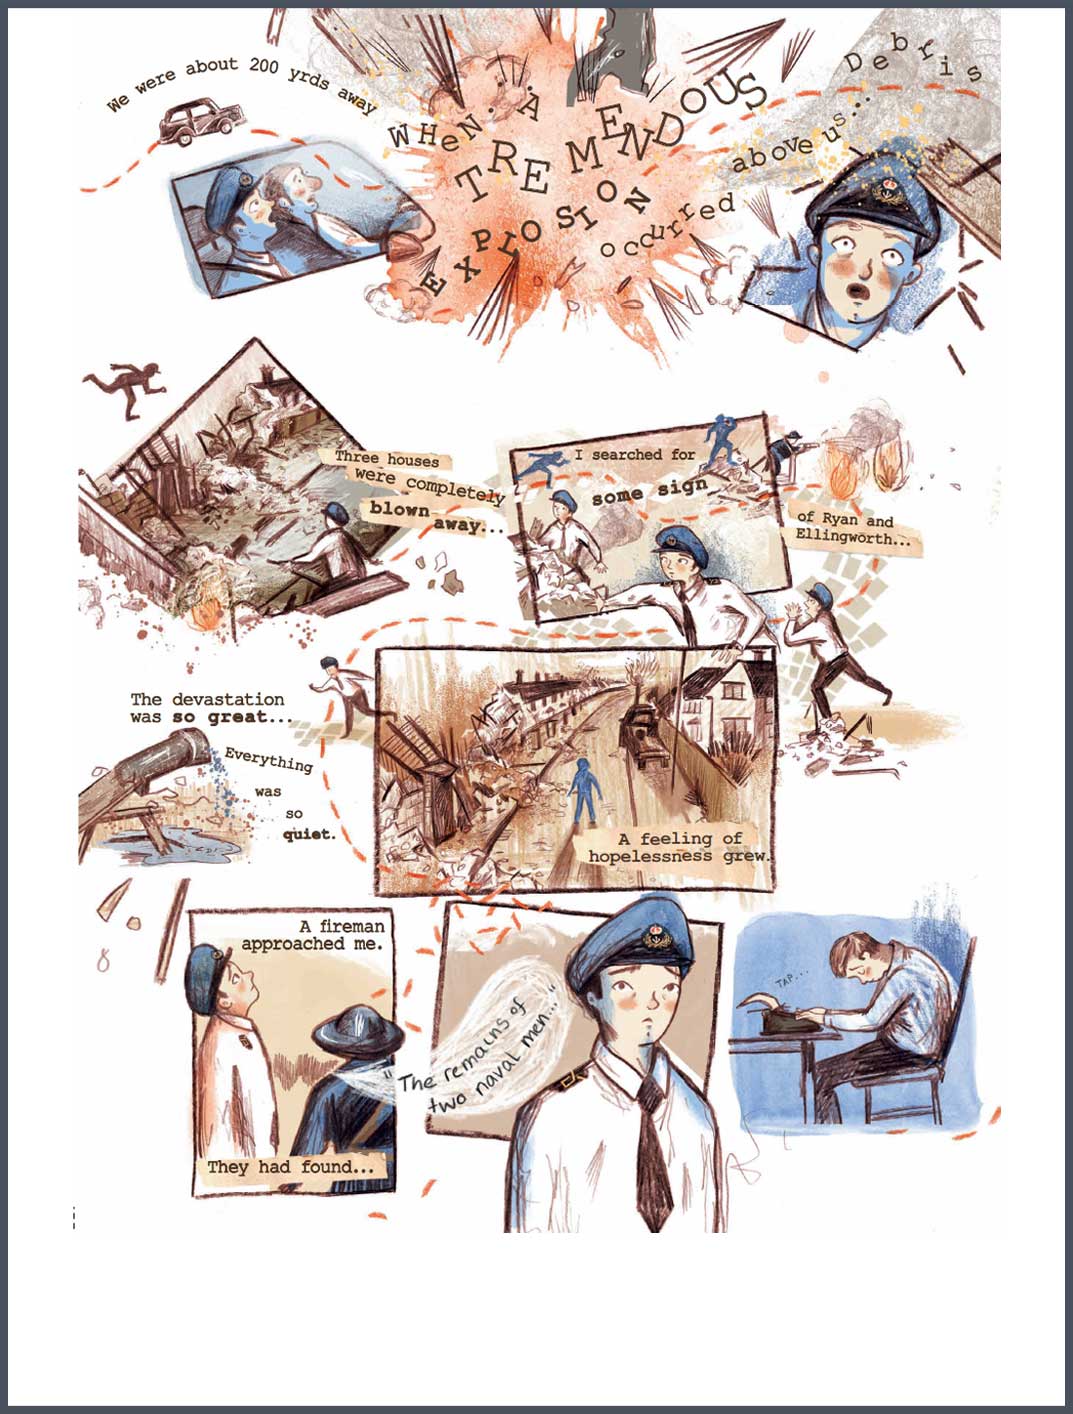 A single page excerpt from this illustrated story, including a drawing of a large explosion and shocked faces.